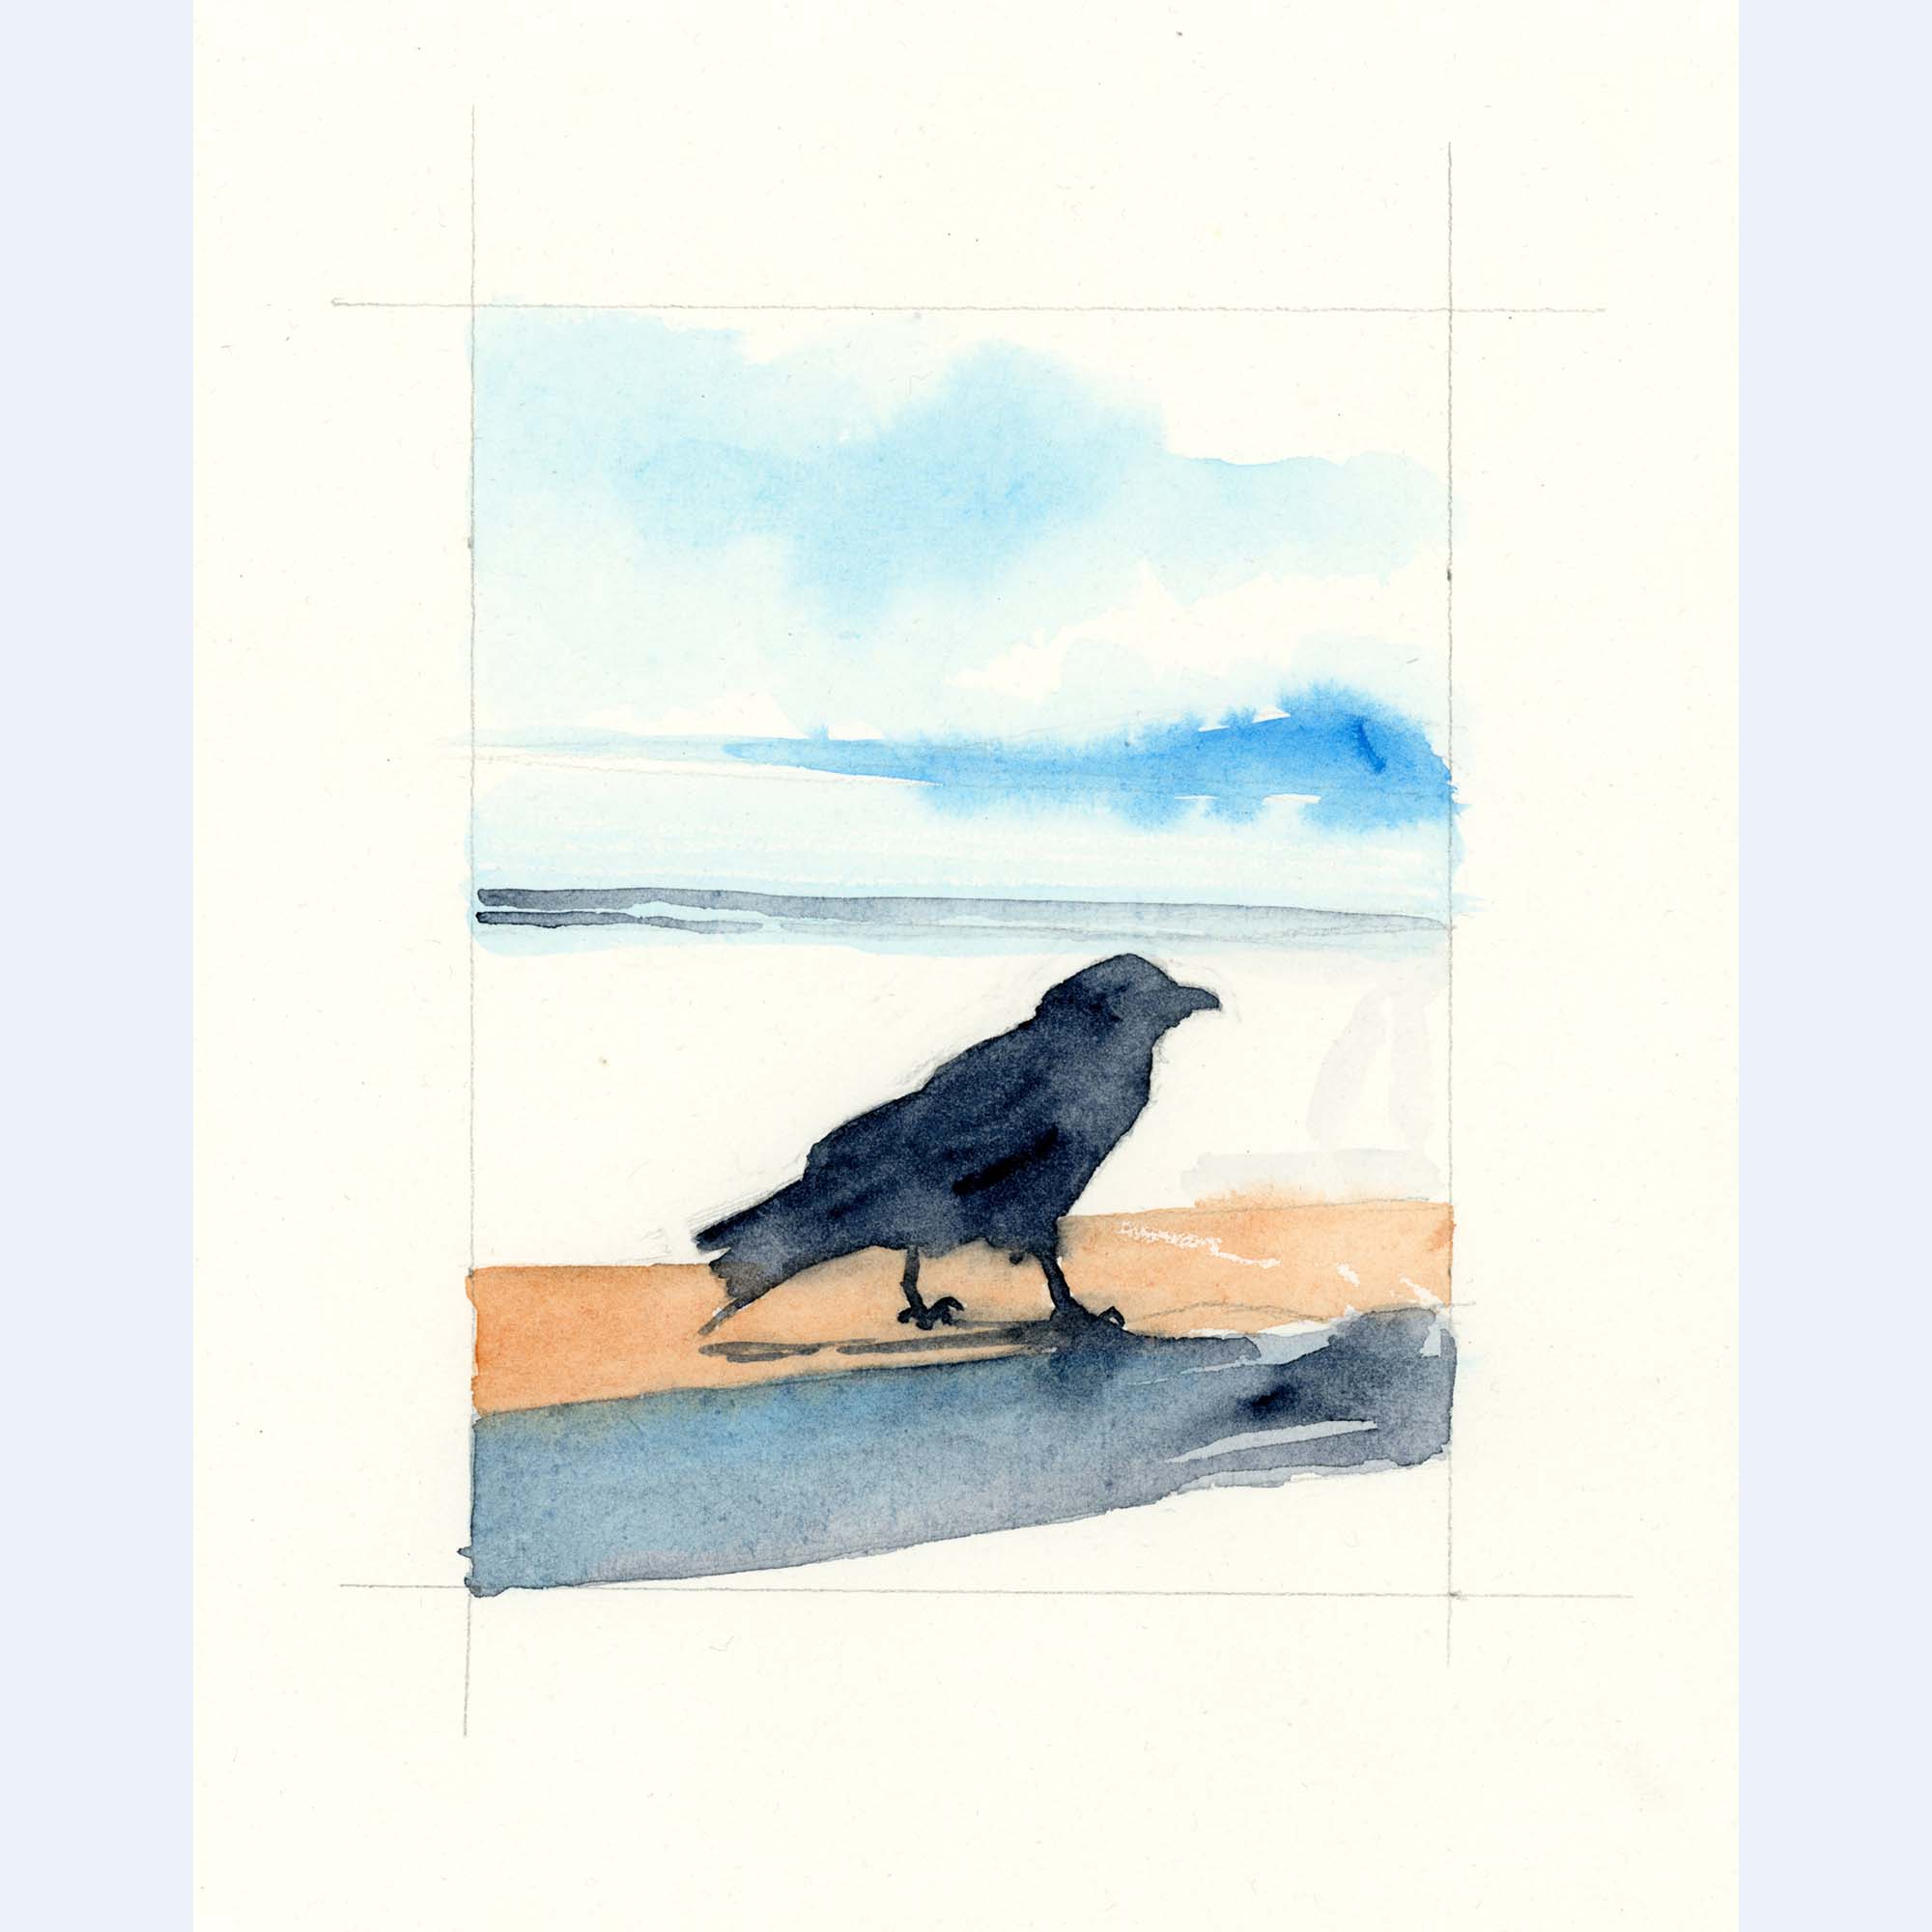 a crow standing on the beach with a cloud behind them